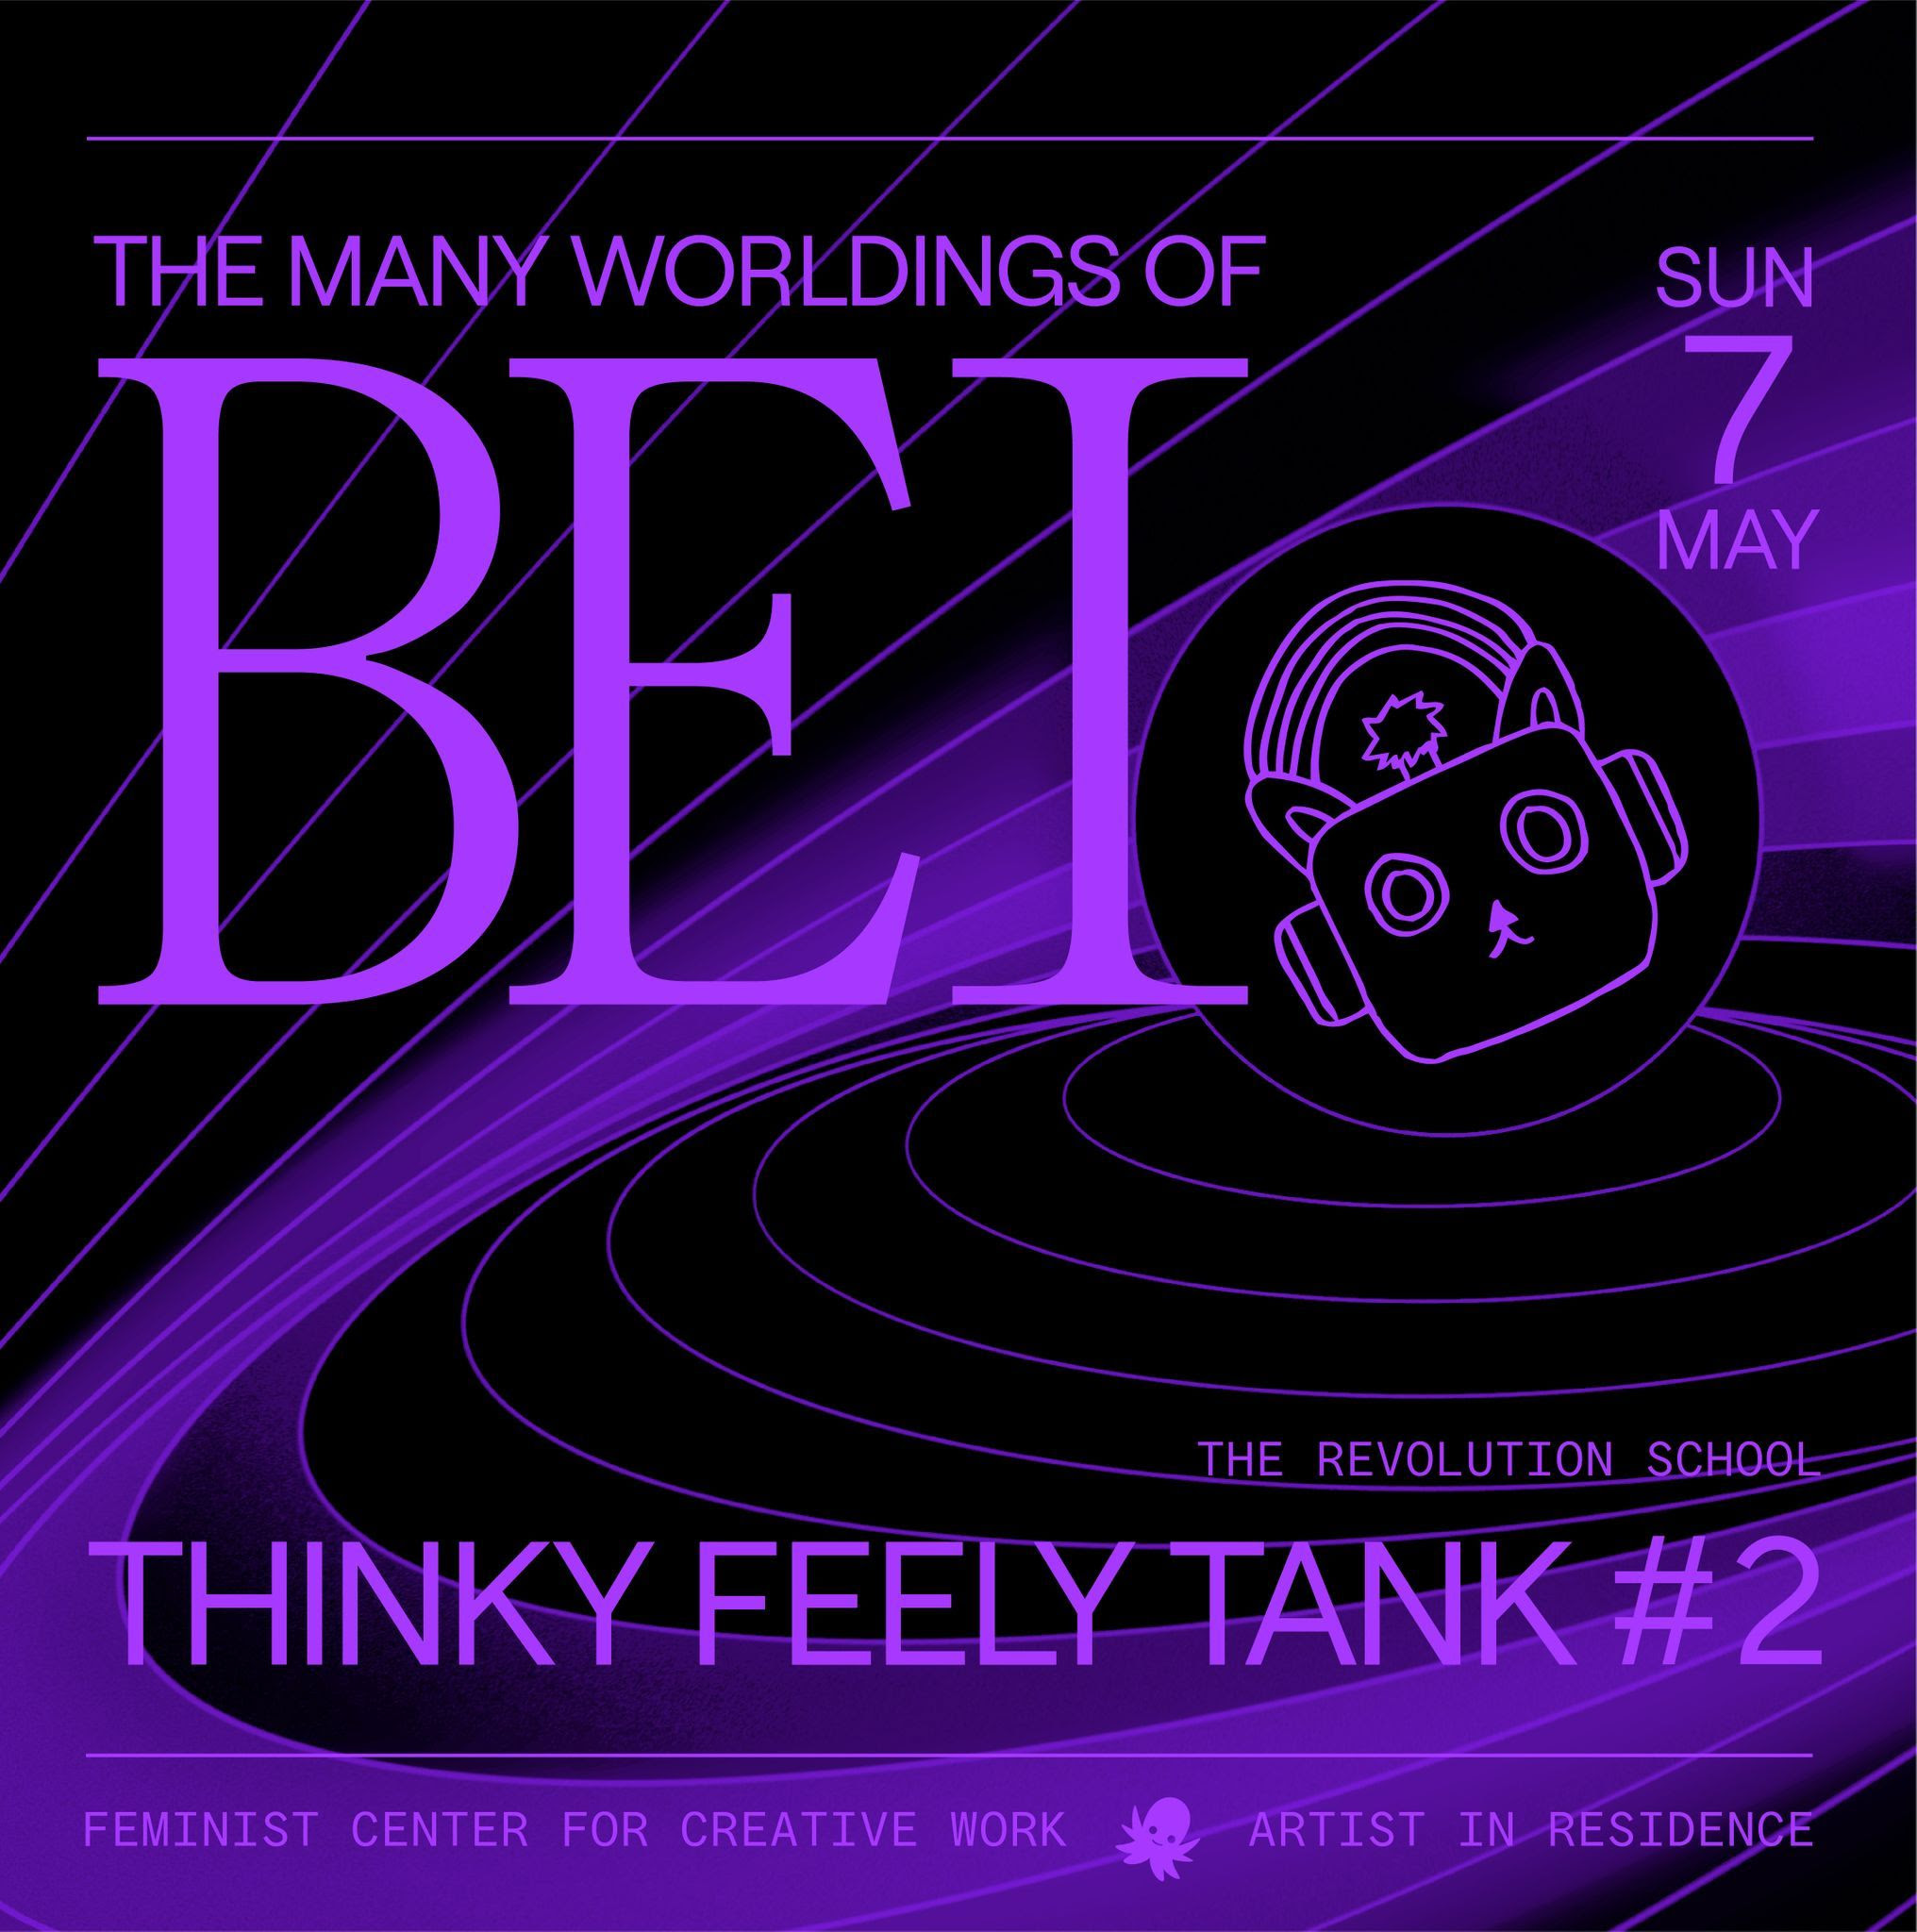 BEI 🤖🐰: Thinky Feely Tank #2 – The Many Worldings of BEI